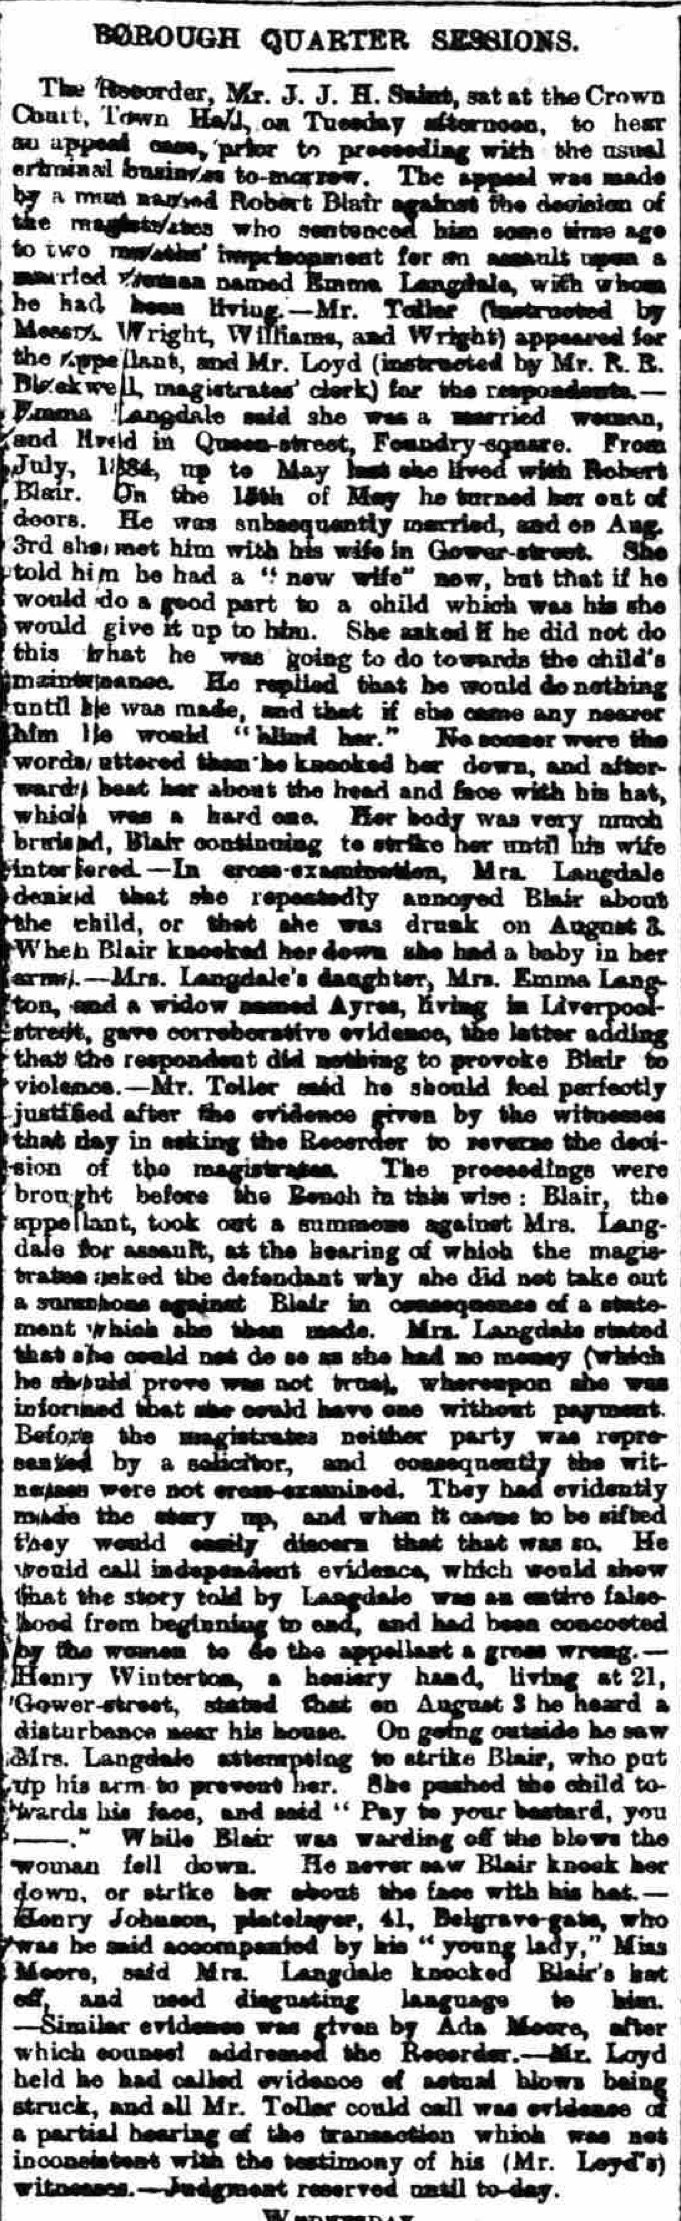 Robert Blair appeals his sentence in 1887 as reported on October 22